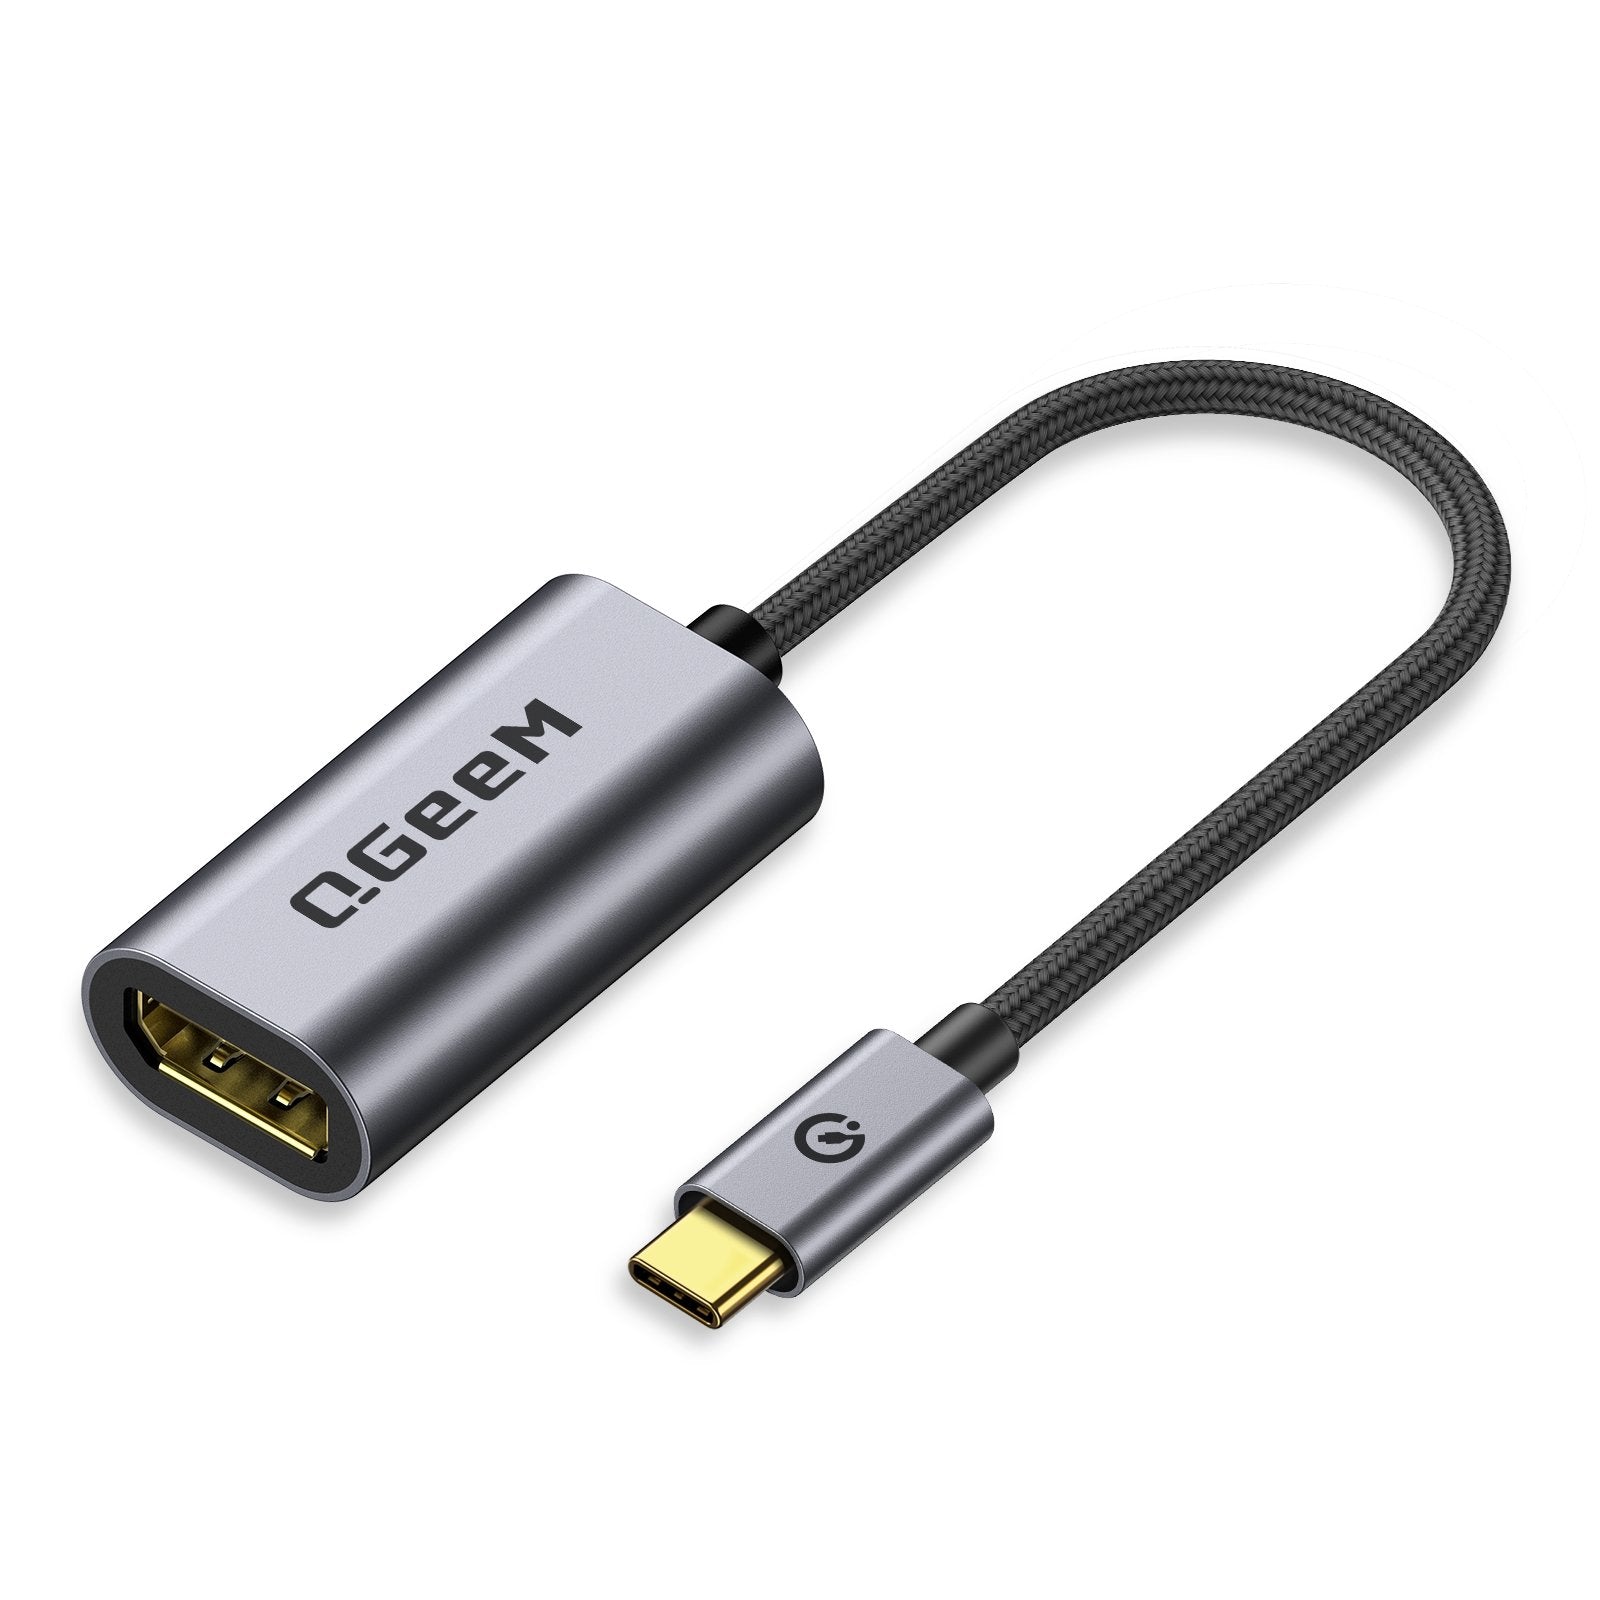 USB C to HDMI Cable Adapter 4K,QGeeM USB Type C to HDMI Cable